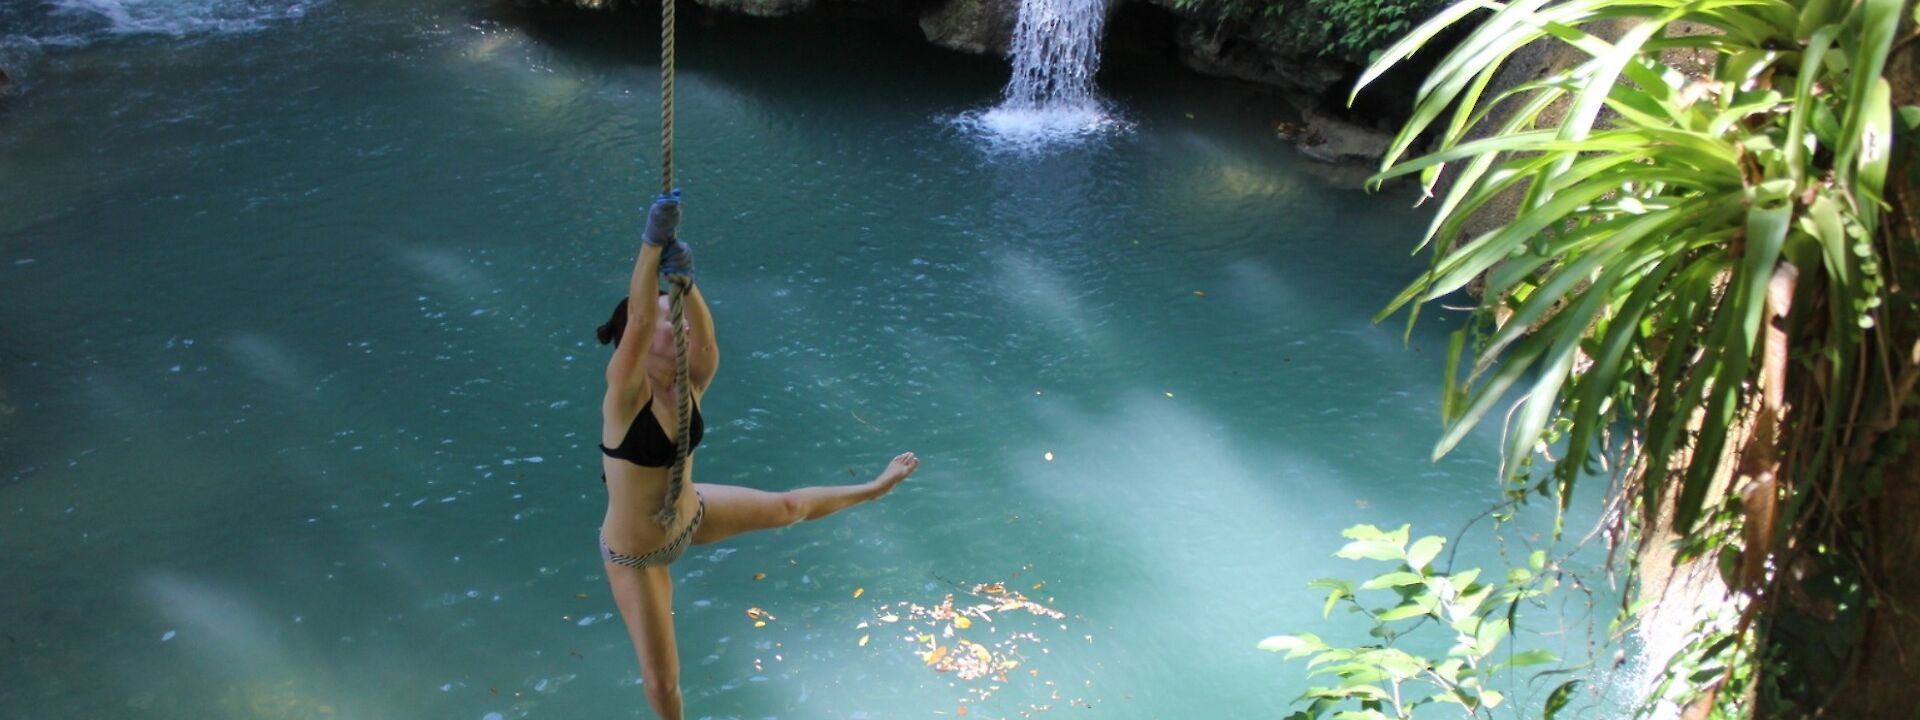 Swinging from a rope at YS Falls, Jamaica.